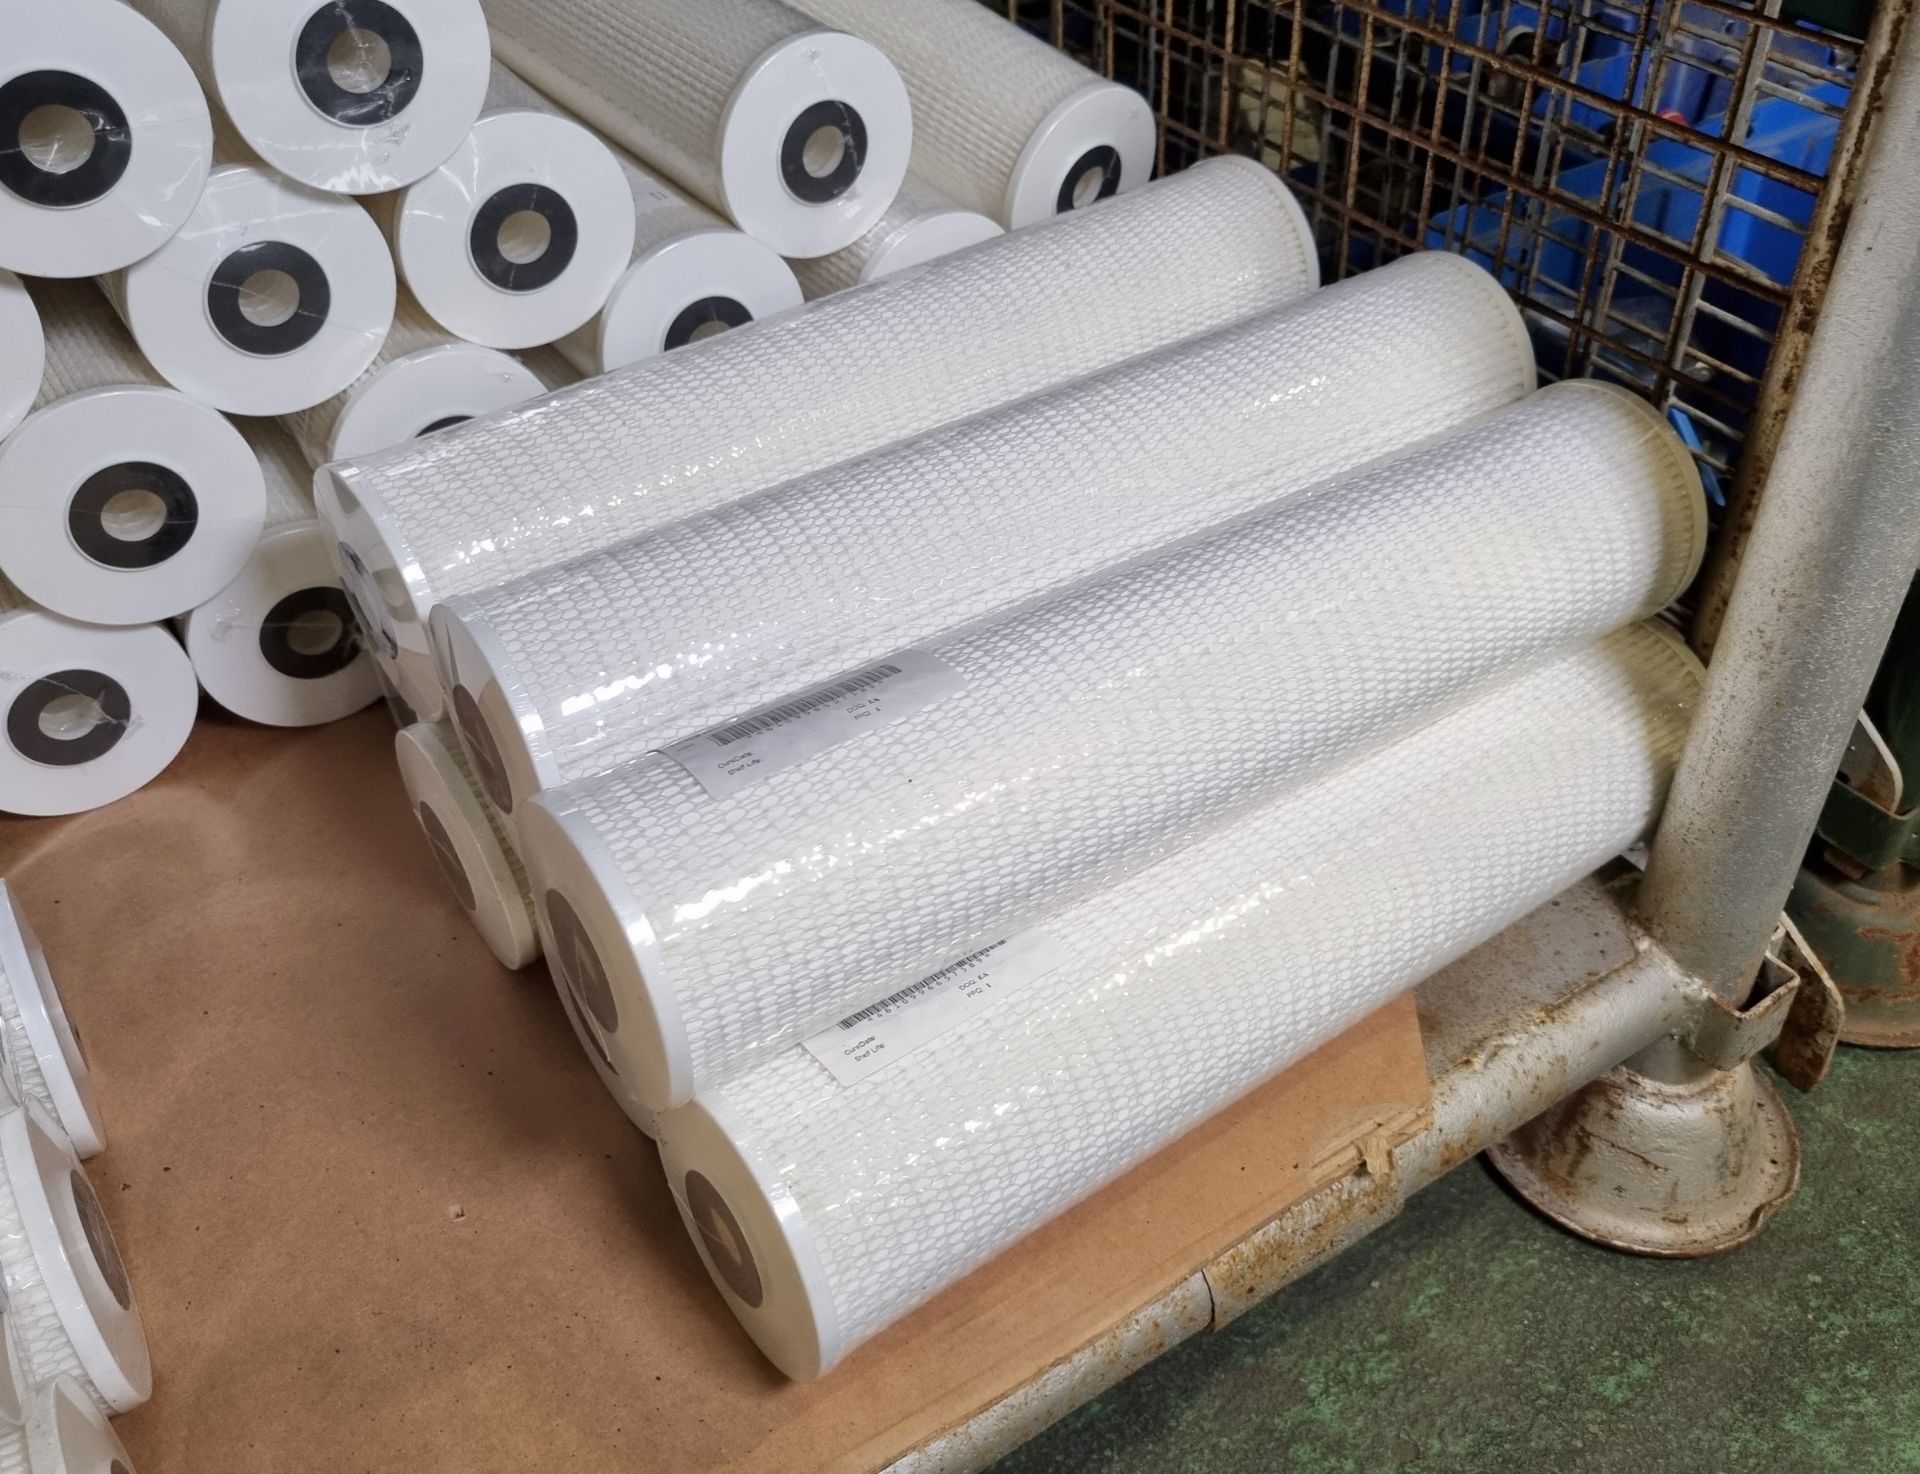 45x Cylinder paper filter cartridges - length: 500mm, OD: 115mm, ID: 28mm - Image 3 of 5